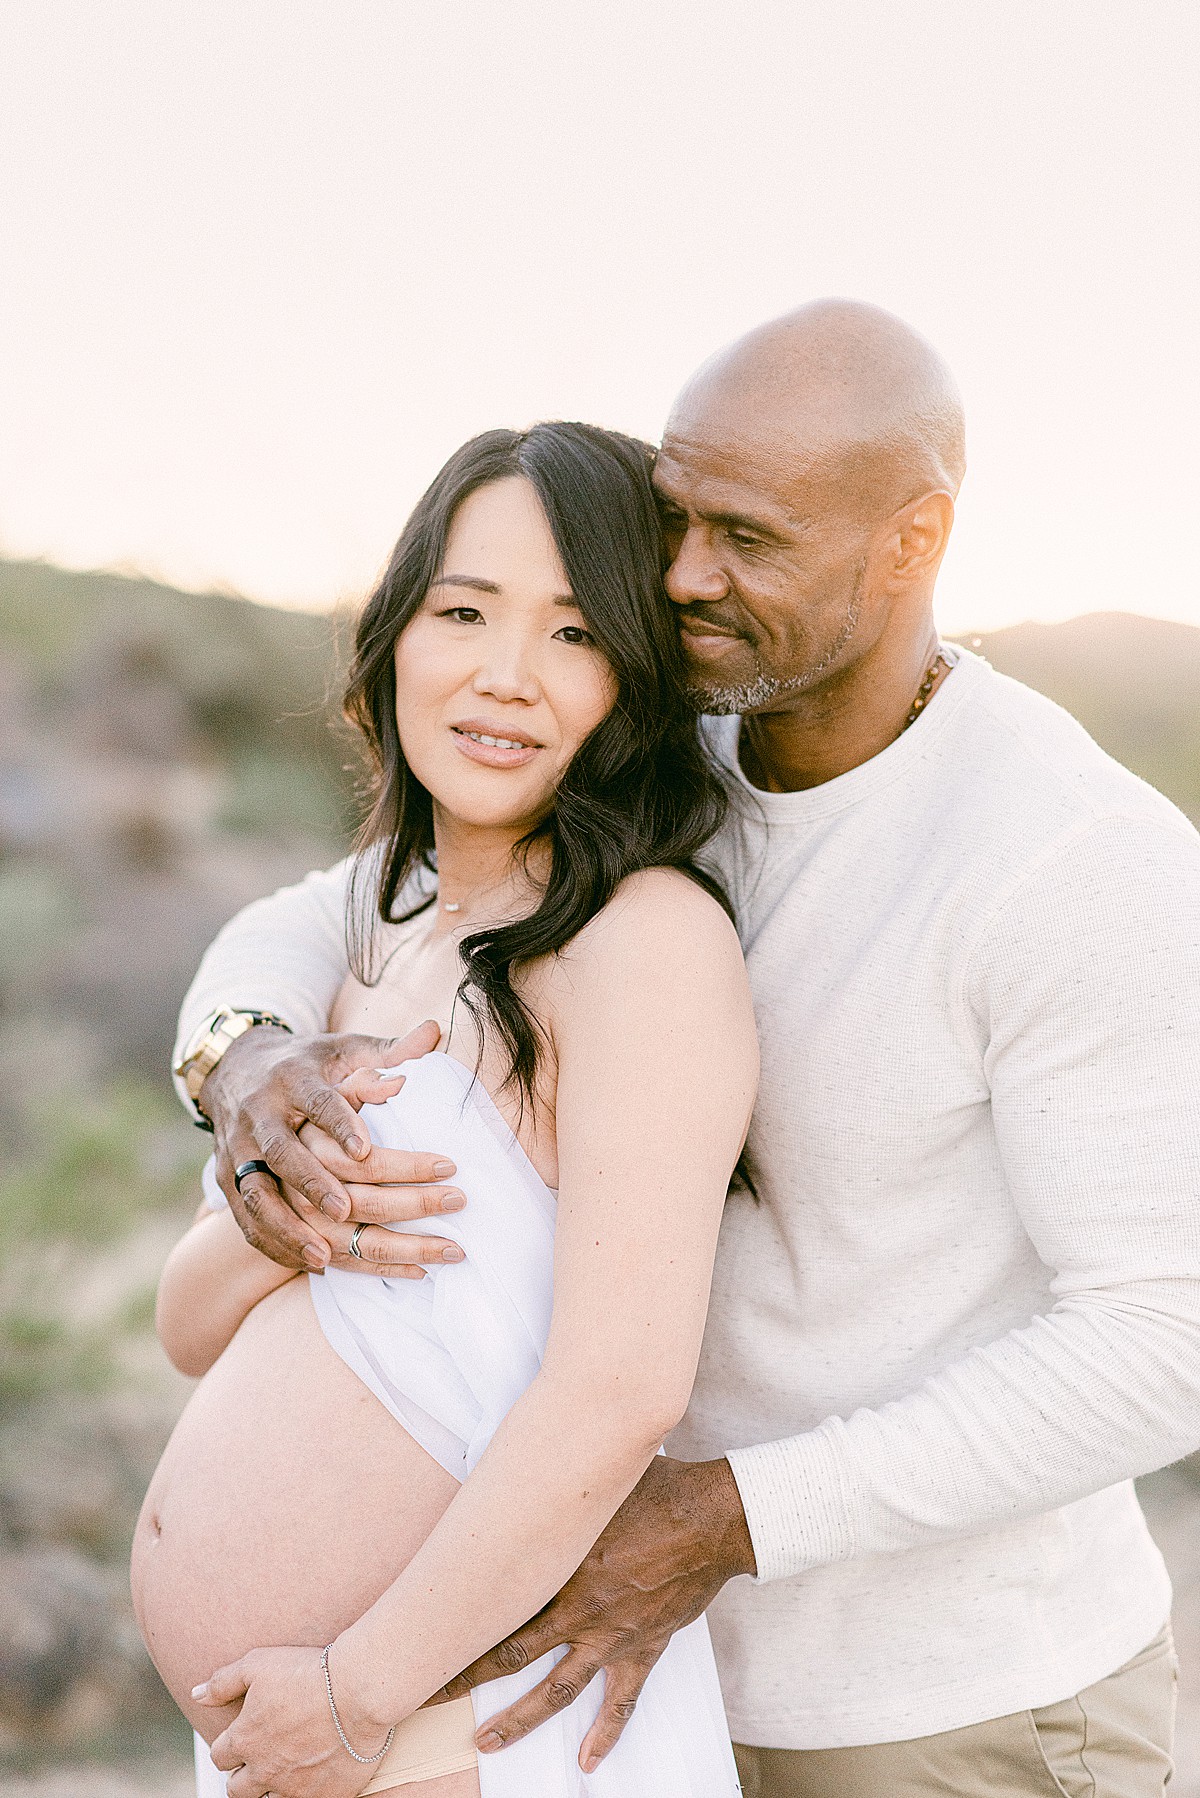 Mom and dad embraced and holding baby bump during maternity session